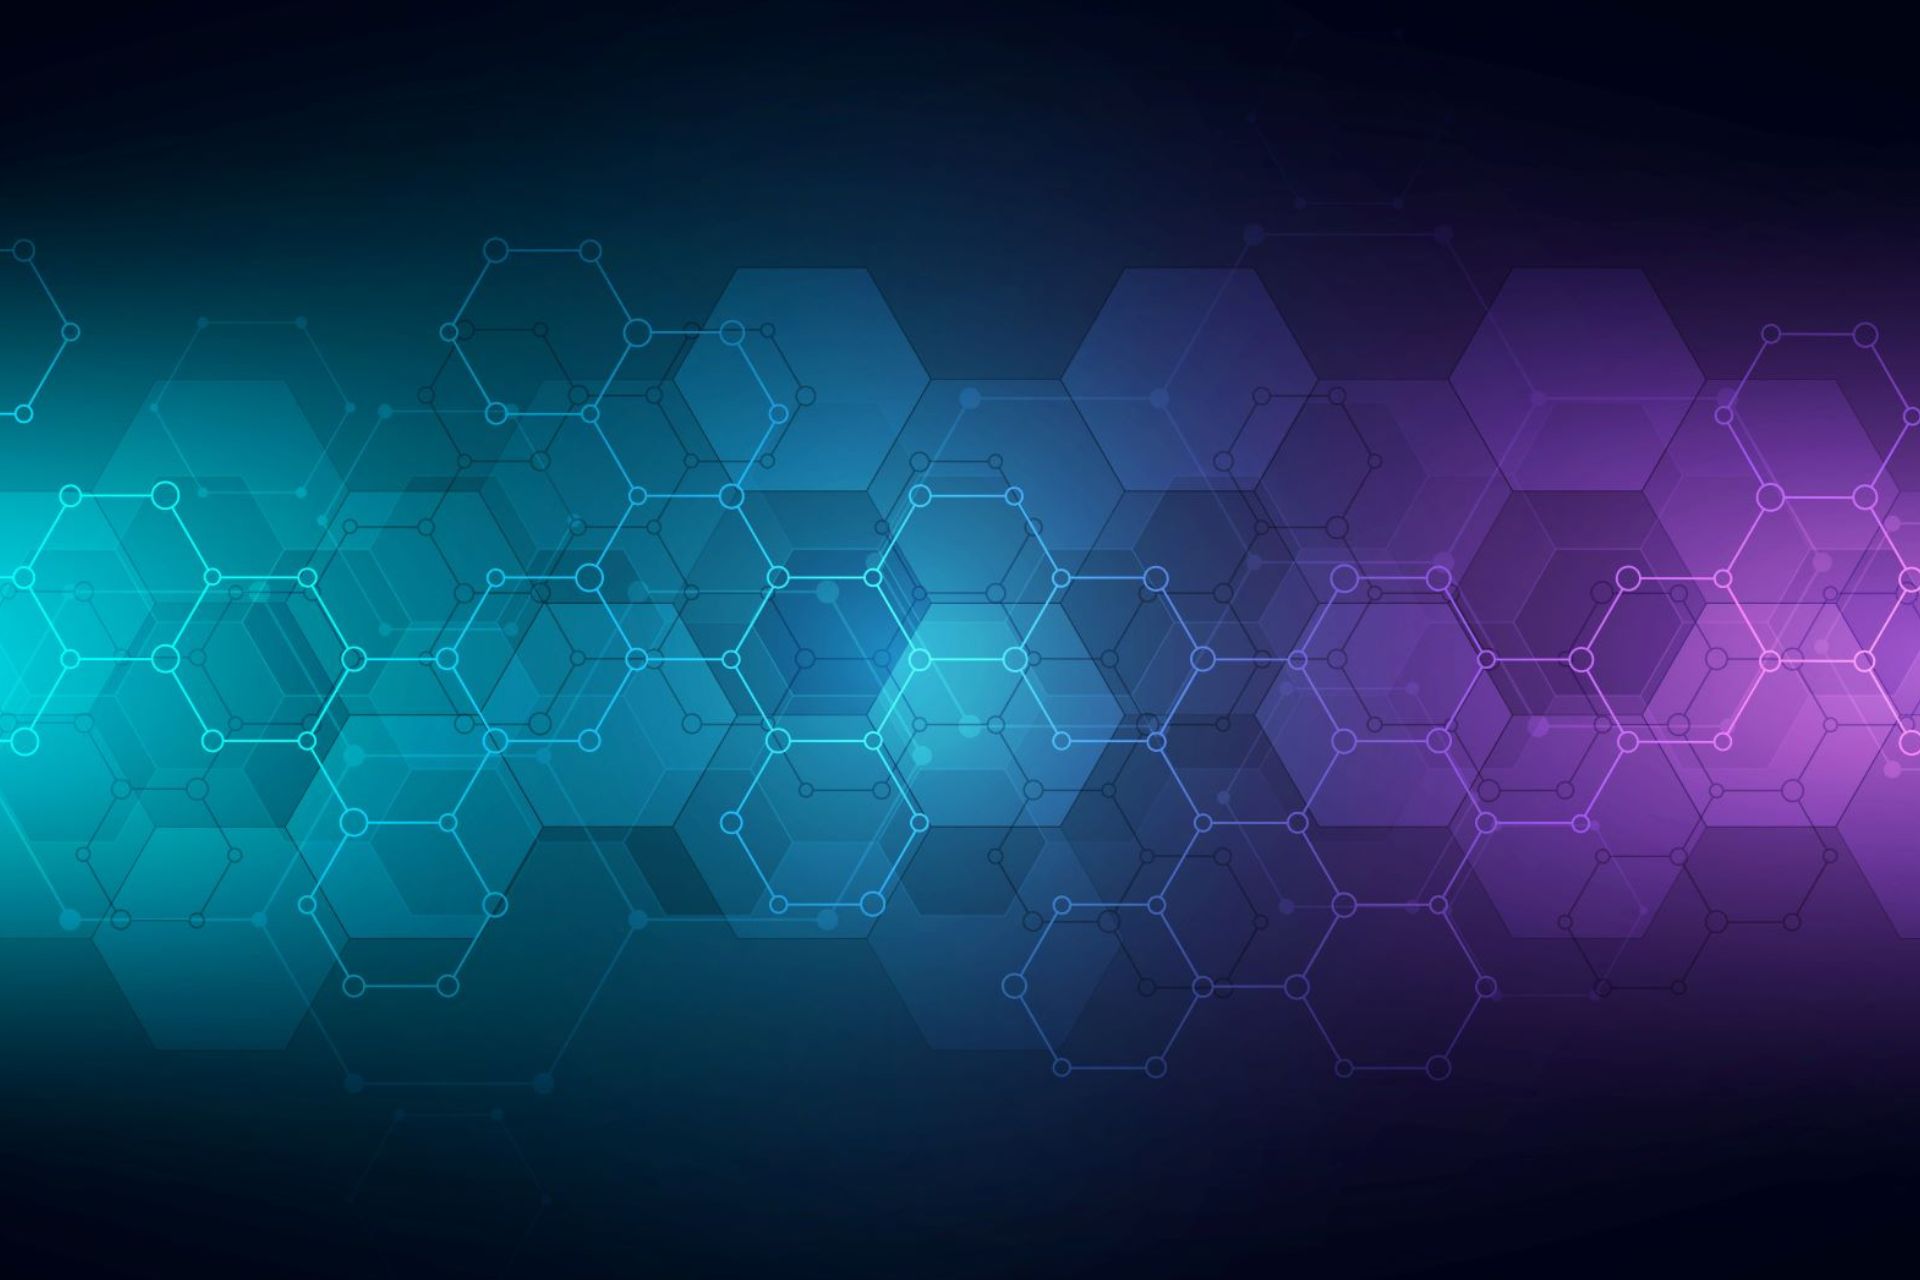 Abstract background of science and innovation technology. Technical background with hexagons pattern and molecular structures.